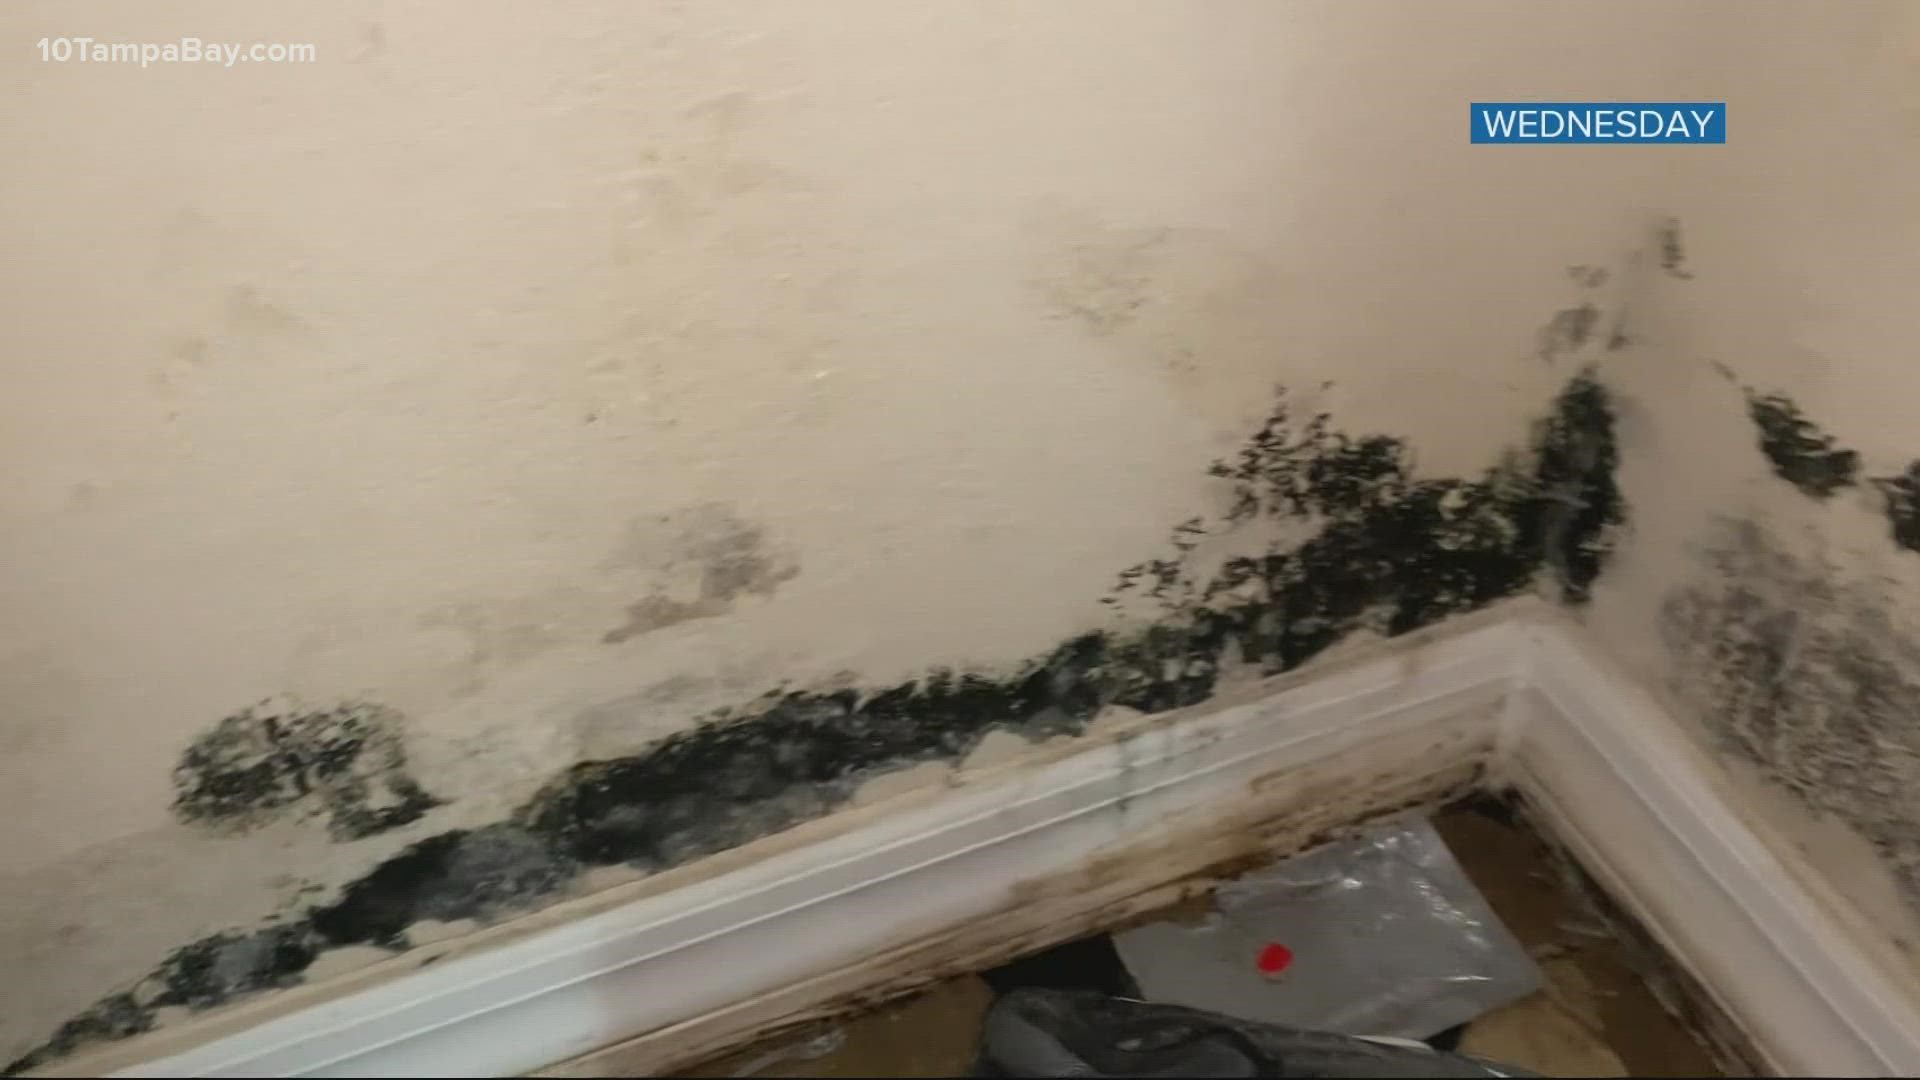 Tenants said they haven't seen this many repairs after their stories went public. For years, they've complained about mold, rodents and broken appliances.